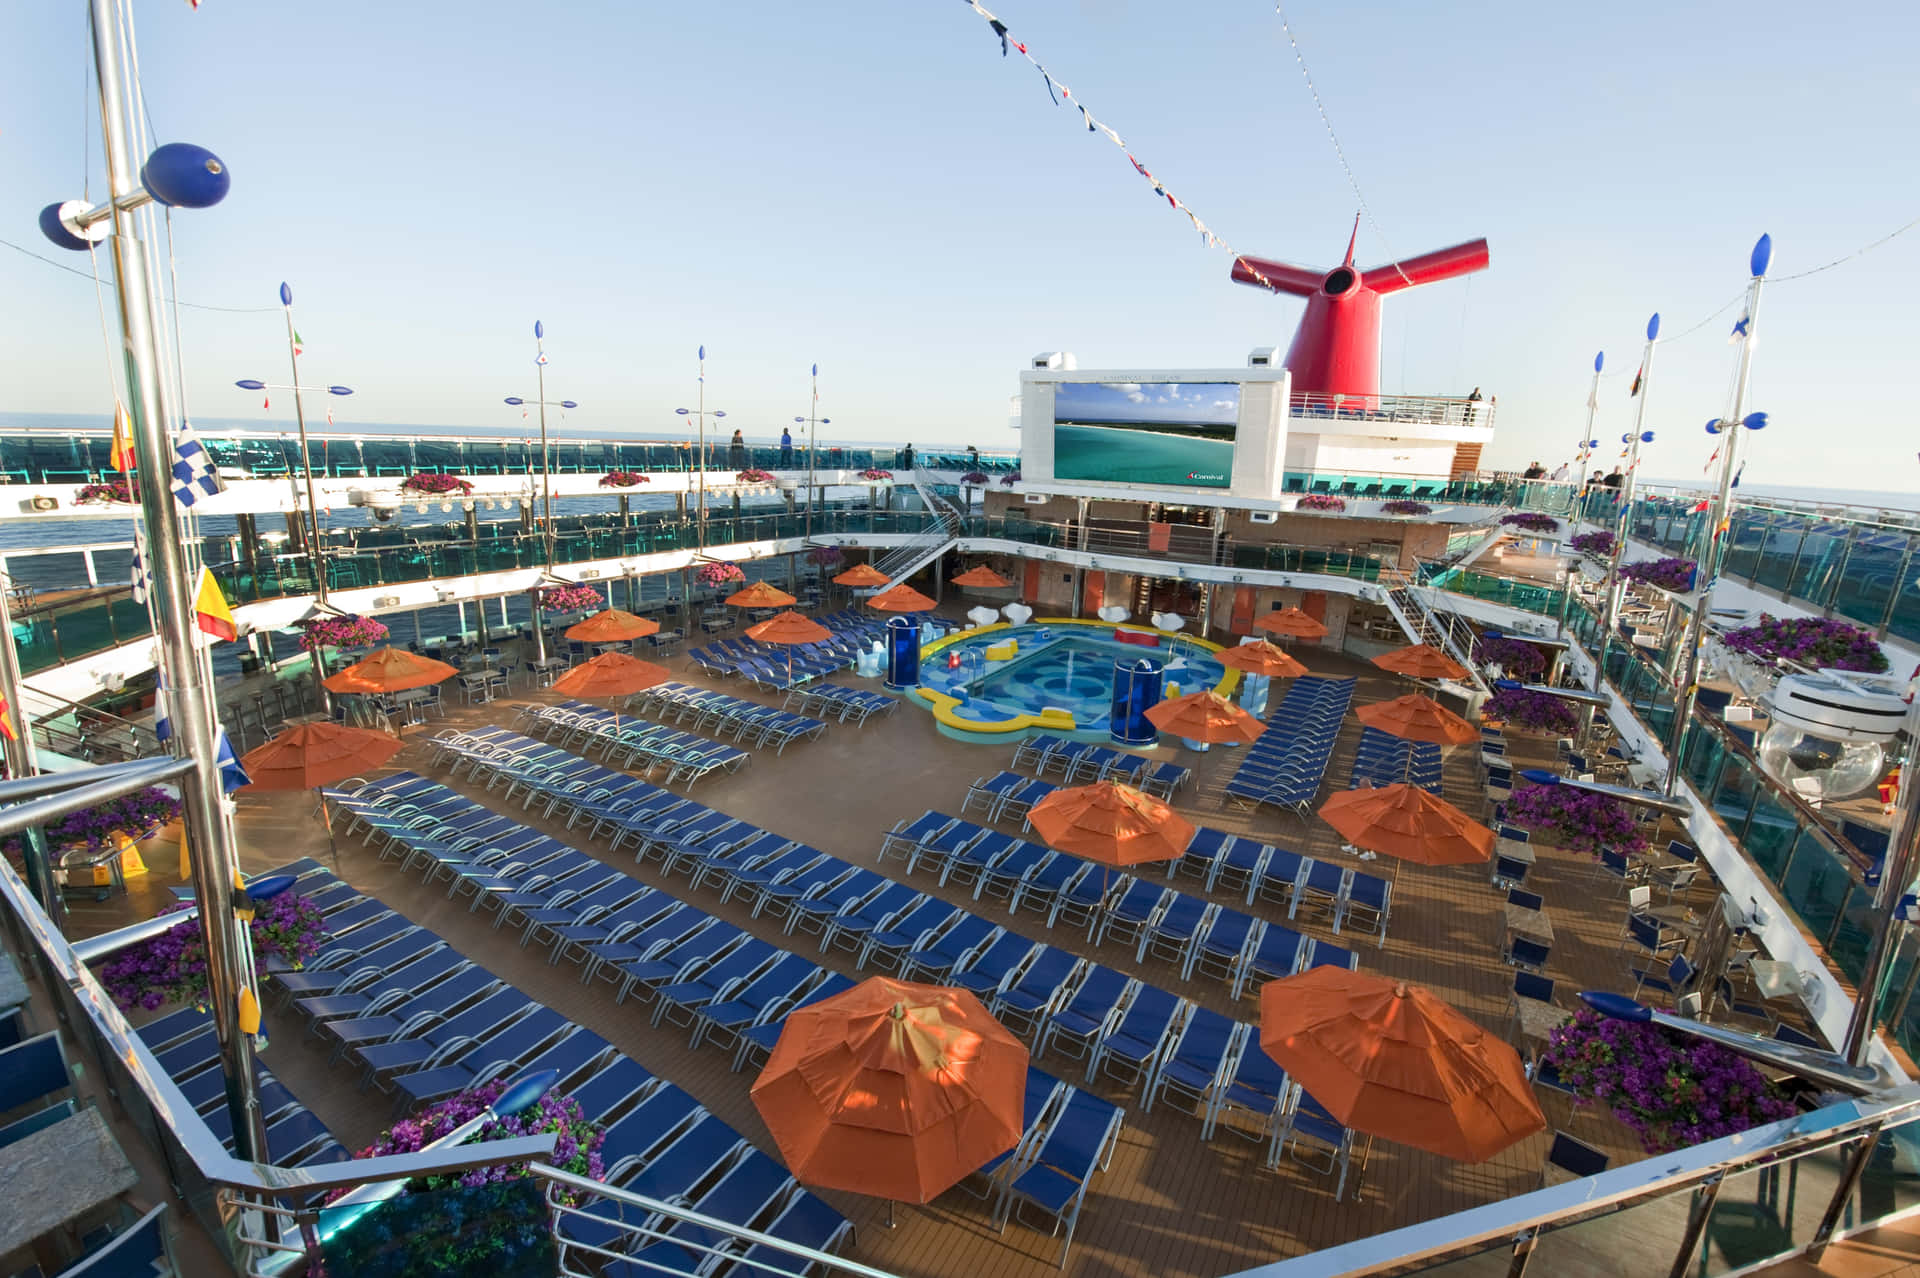 Enjoy a beautiful and memorable vacation on board the Carnival Dream